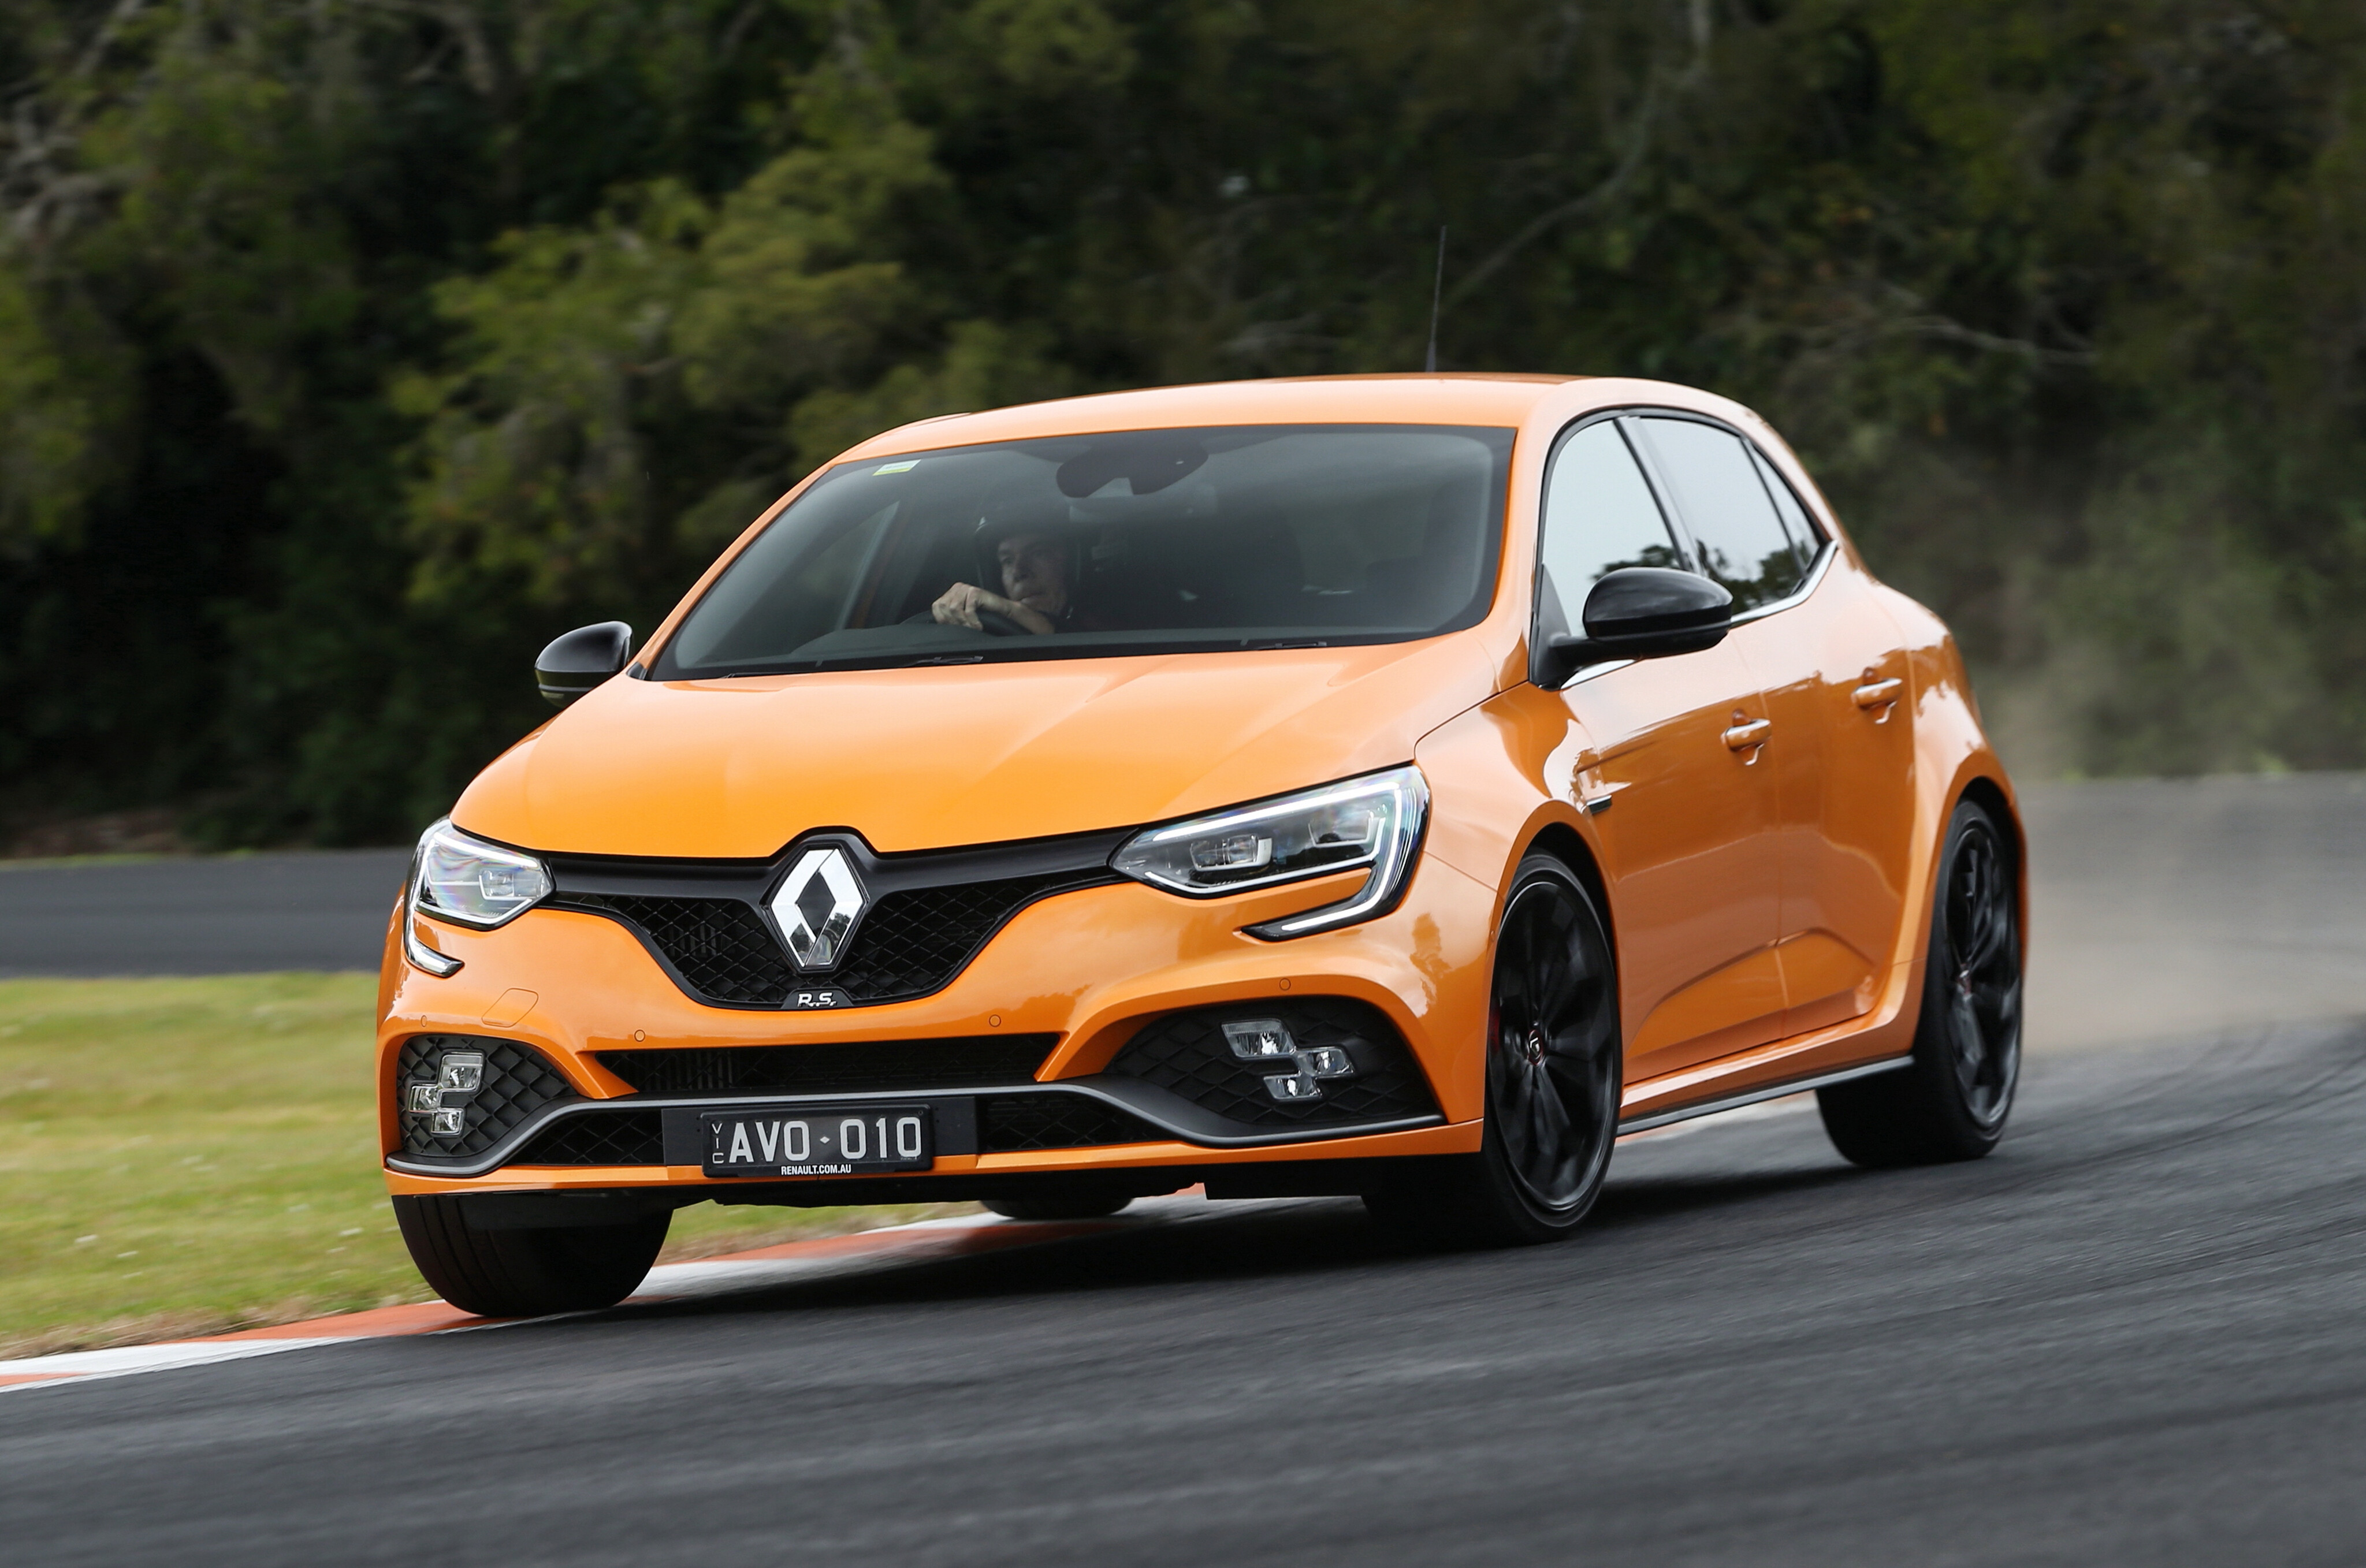 c0be14fa/2018 renault megane rs cup chassis 2 jpeg